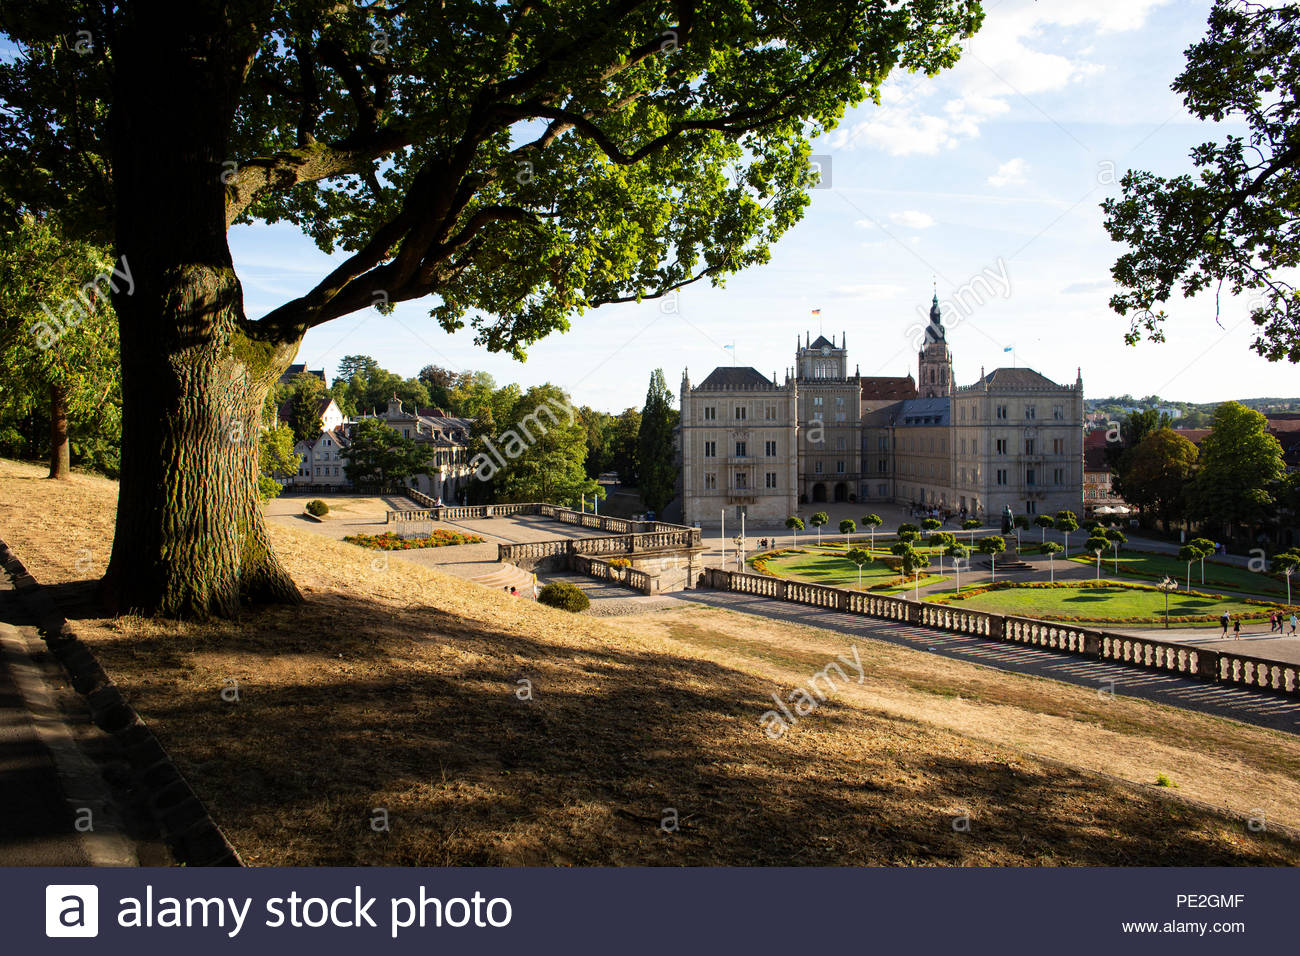 The skyline over Coburg Germany with Schloss Ehrenburg to the right of the picture Stock Photo